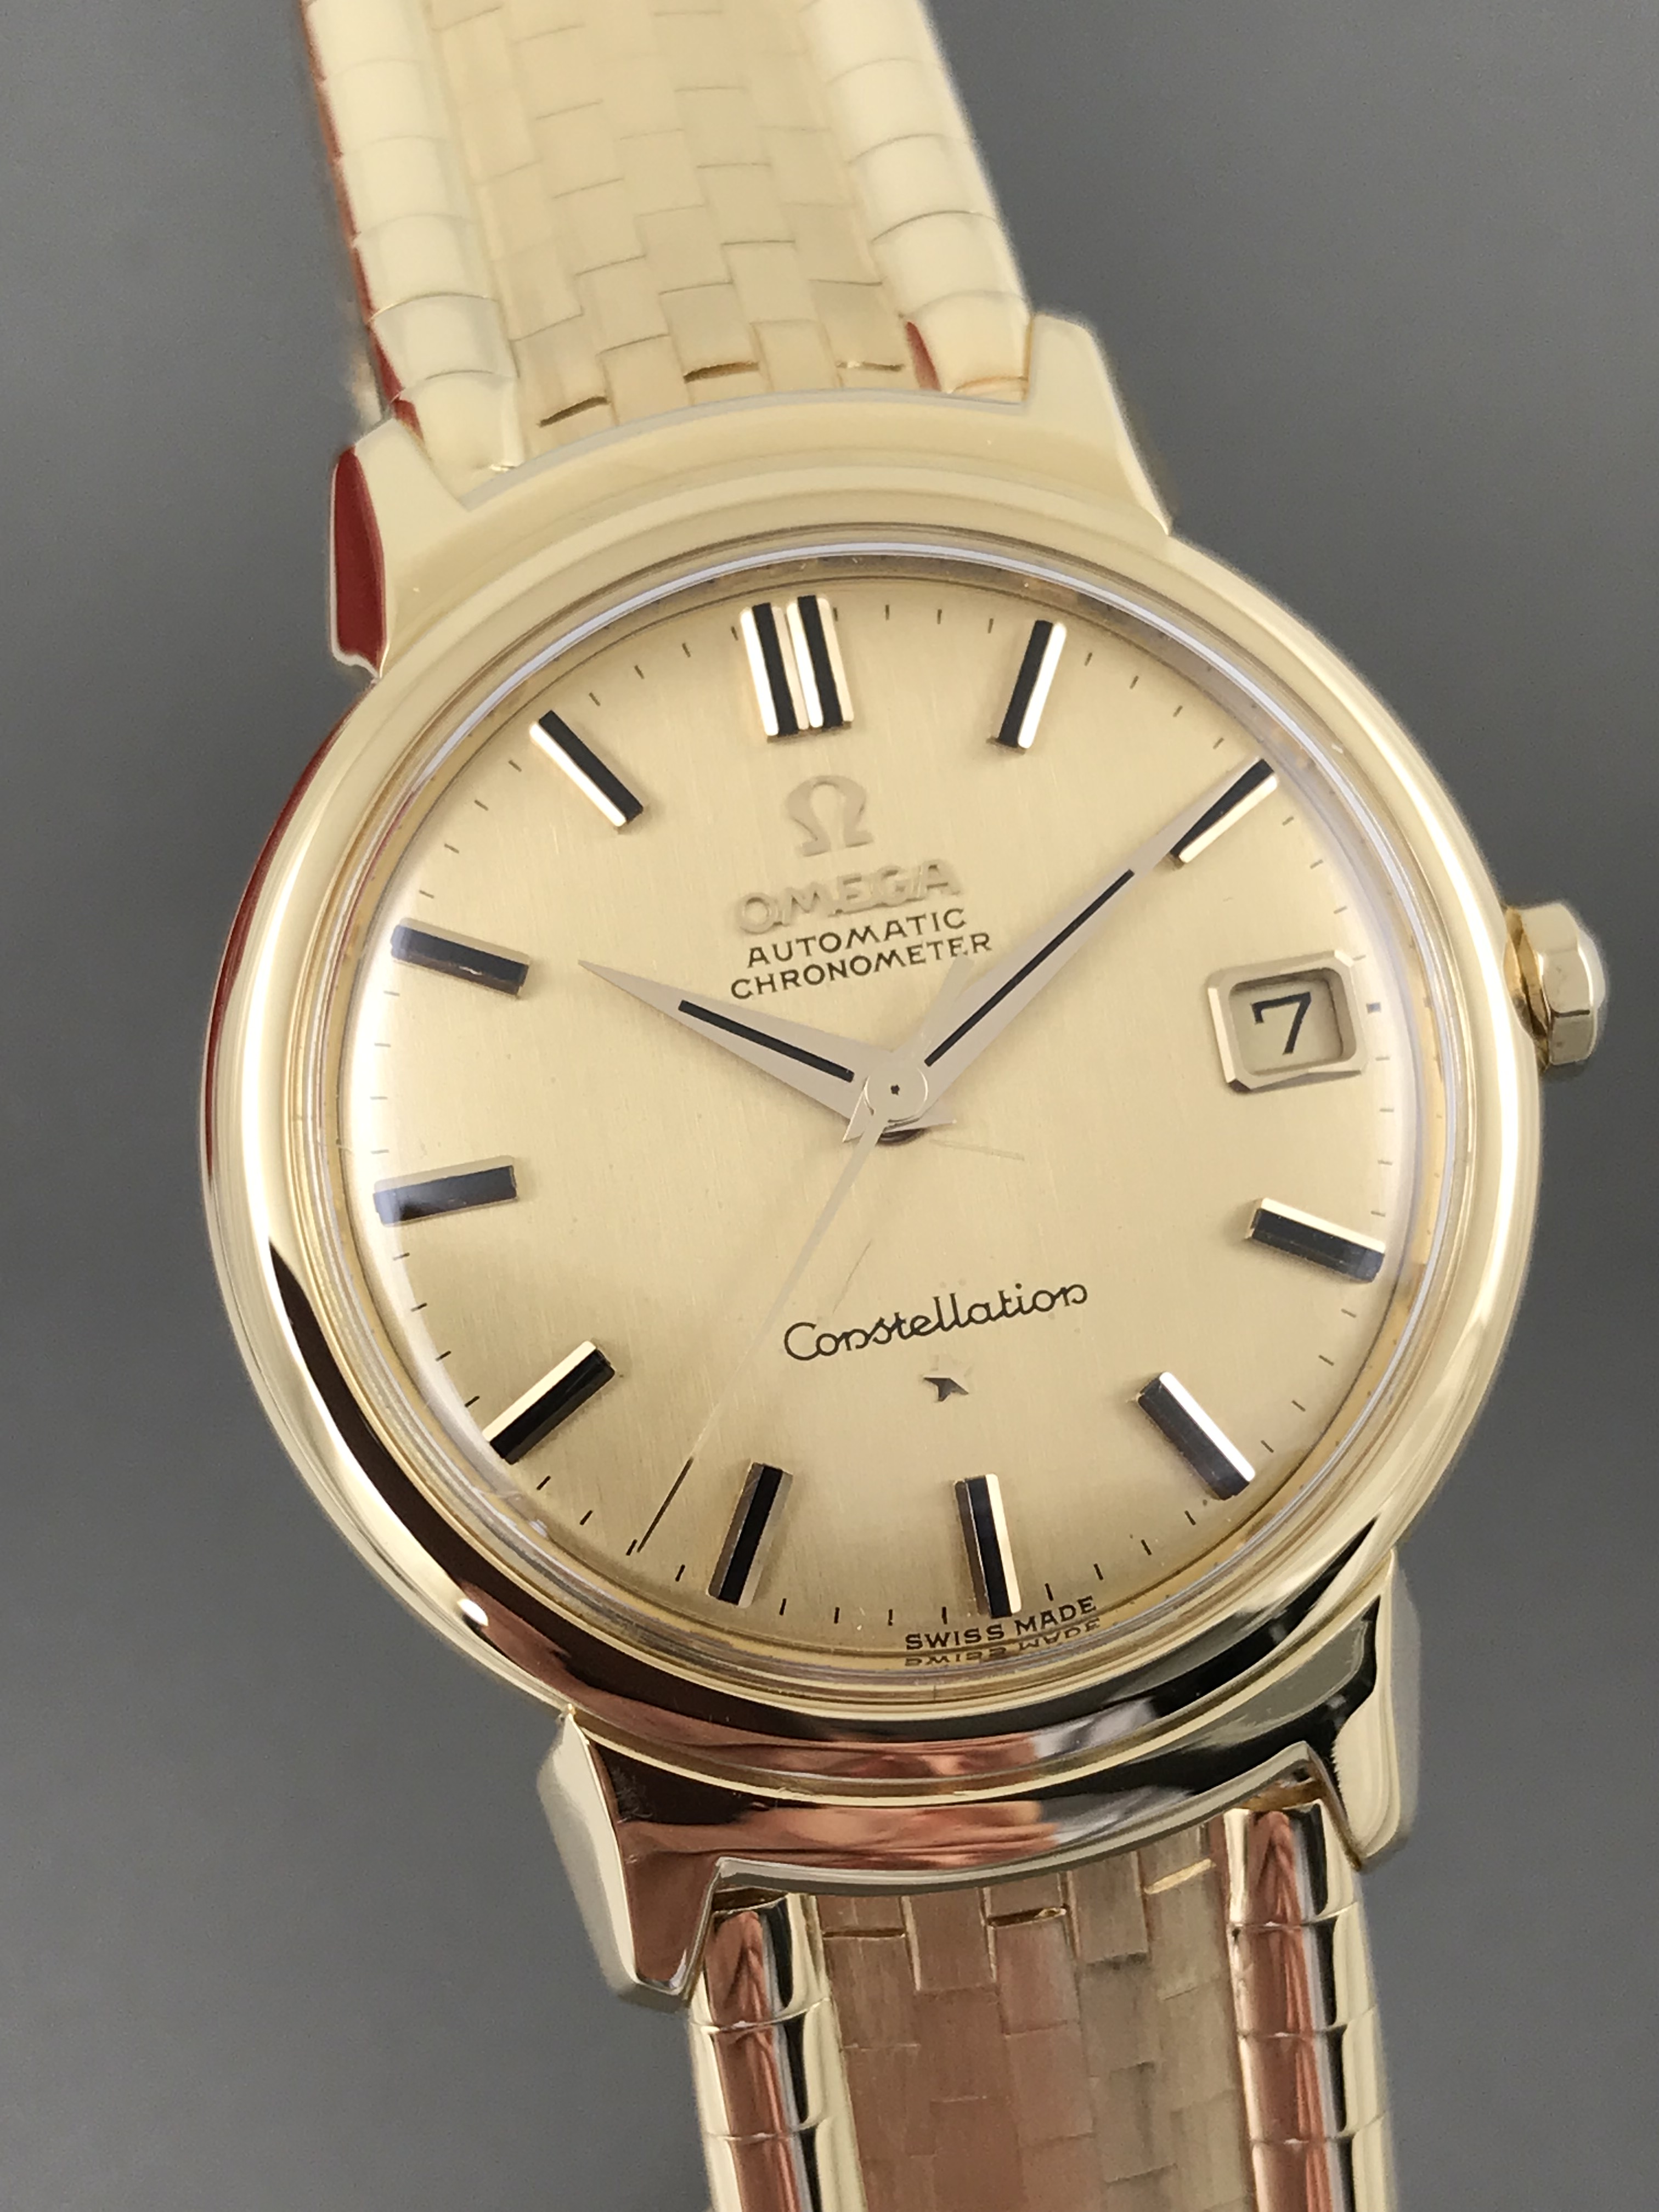 Omega Constellation Grand Luxe